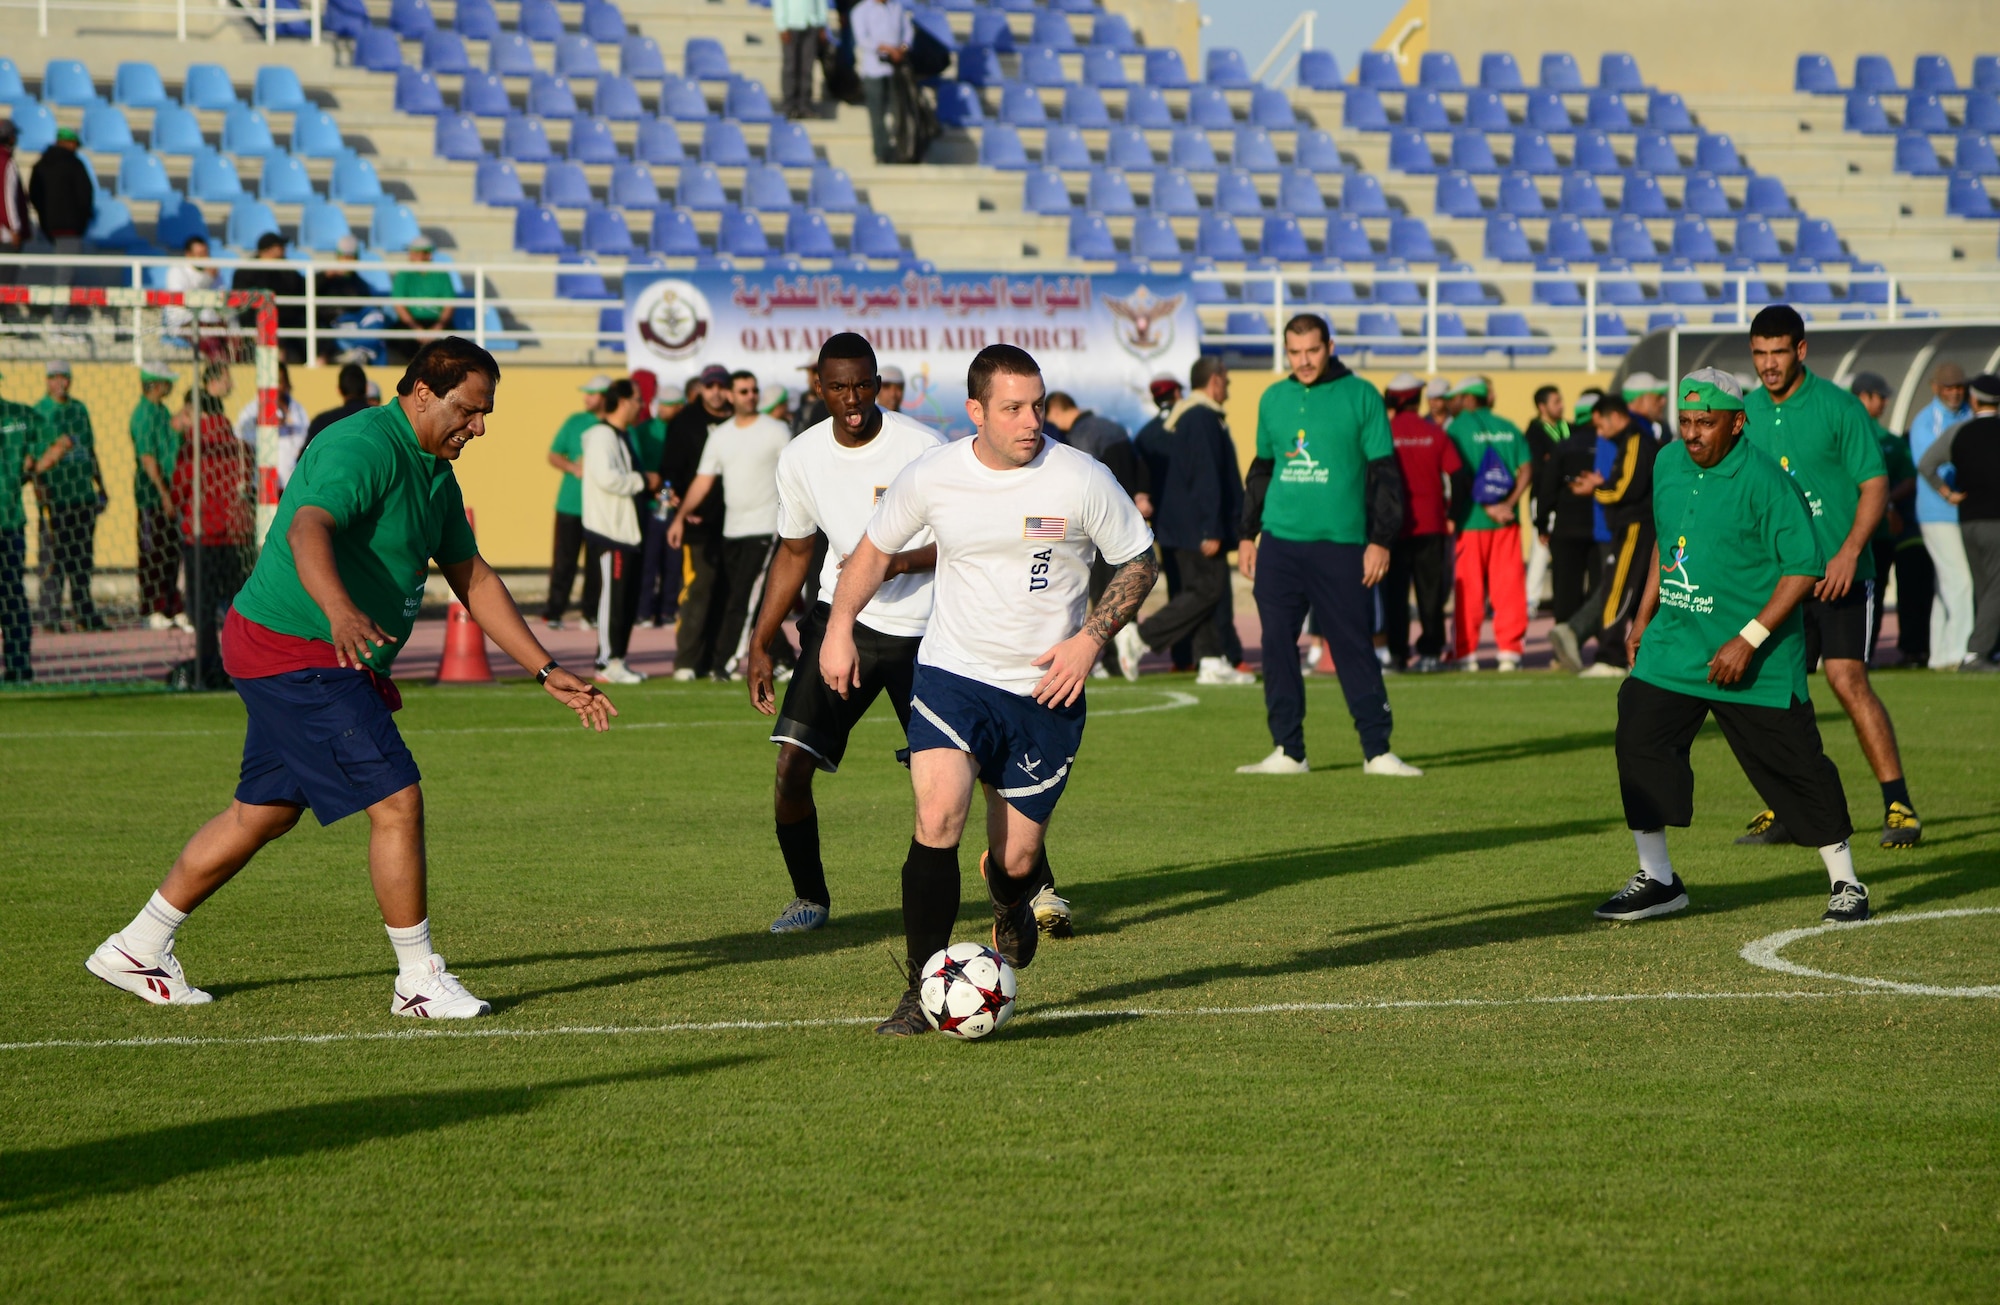 U.S. servicemembers and Qatar Emiri Air Force members play a friendly game of soccer during Qatar National Sports Day, Feb. 10, 2015, at Al Udeid Air Base, Qatar. More than 80servicemembers teamed up to form basketball, soccer and volleyball teams to compete with the Qatar Emiri Air Force during their sports day. (U.S. Air Force photo by Senior Airman Kia Atkins)